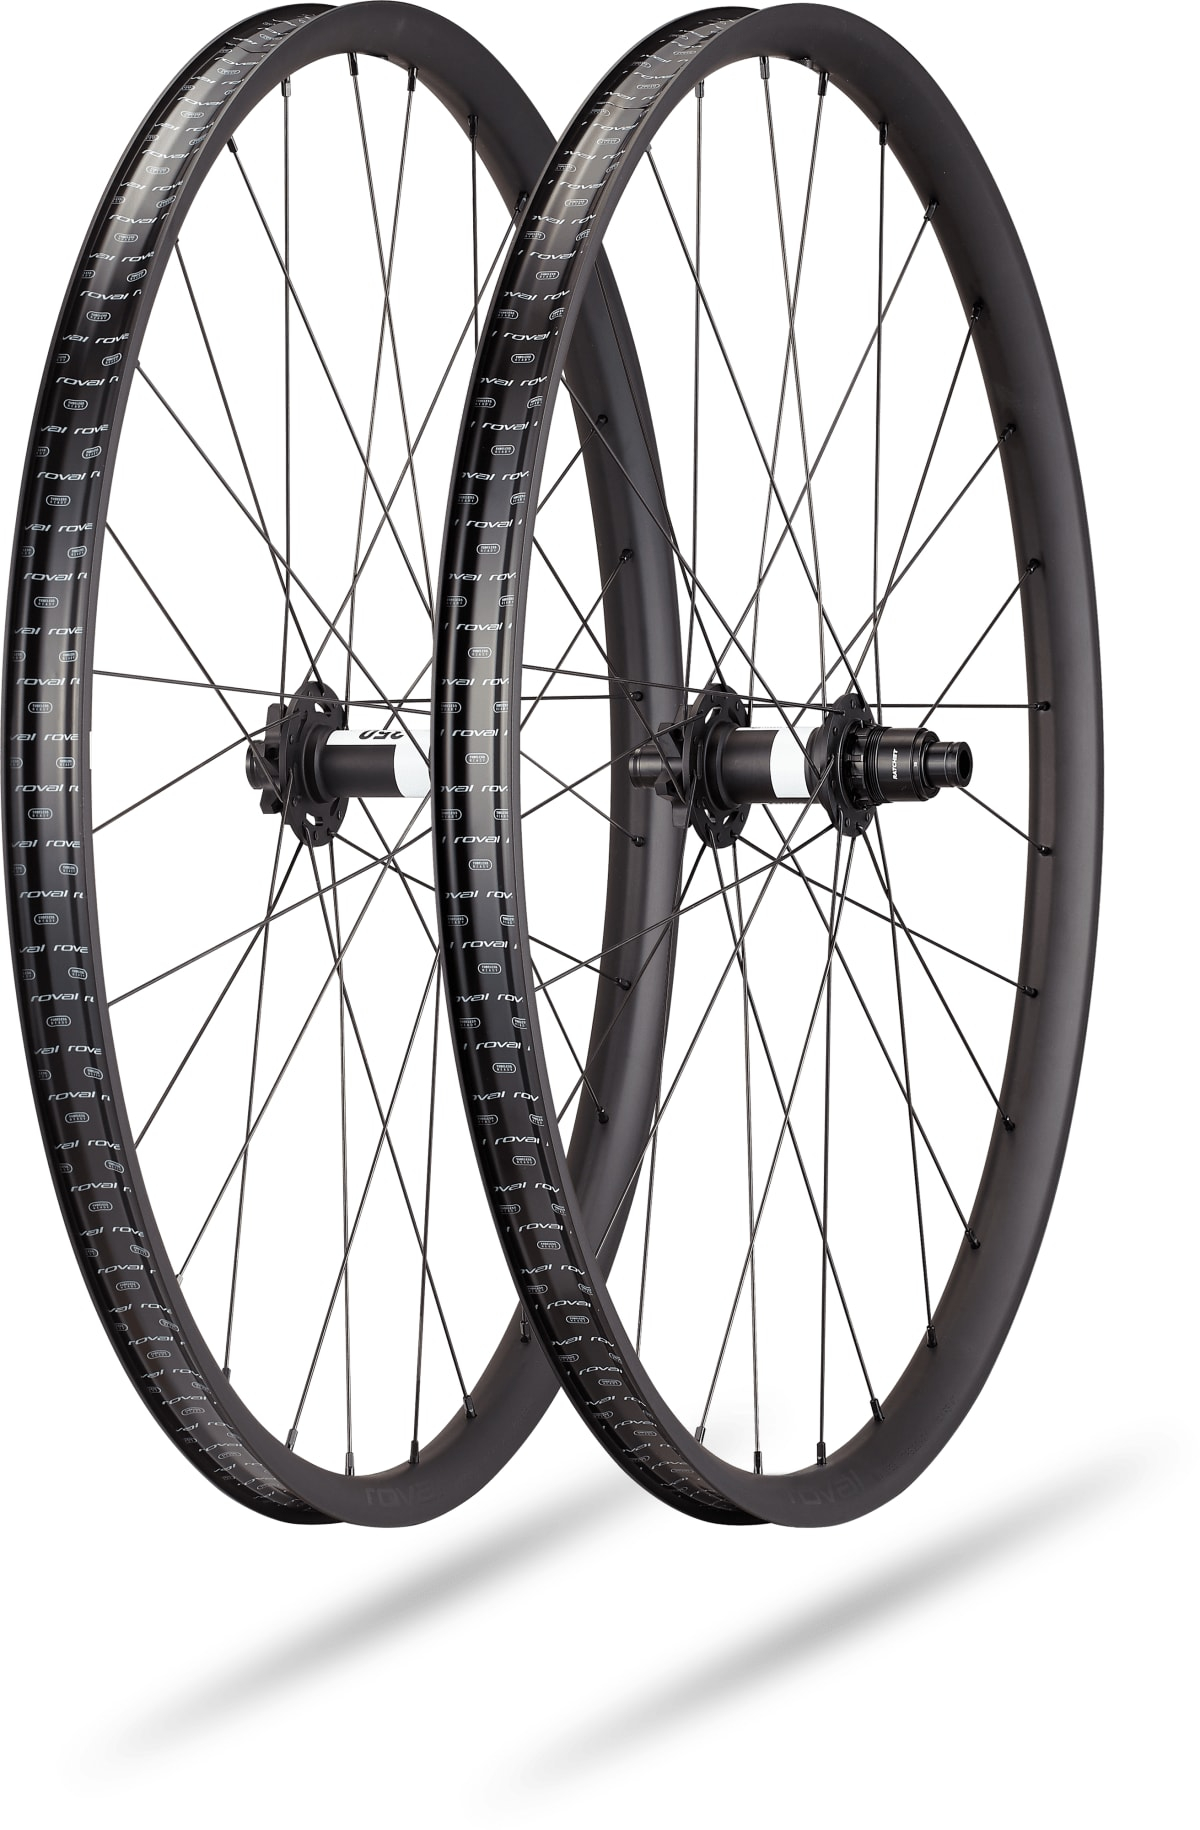 Cycles UK Specialized  Roval Traverse Alloy 350 6B Mountain Bike Wheels 29 Front Black/Charcoal